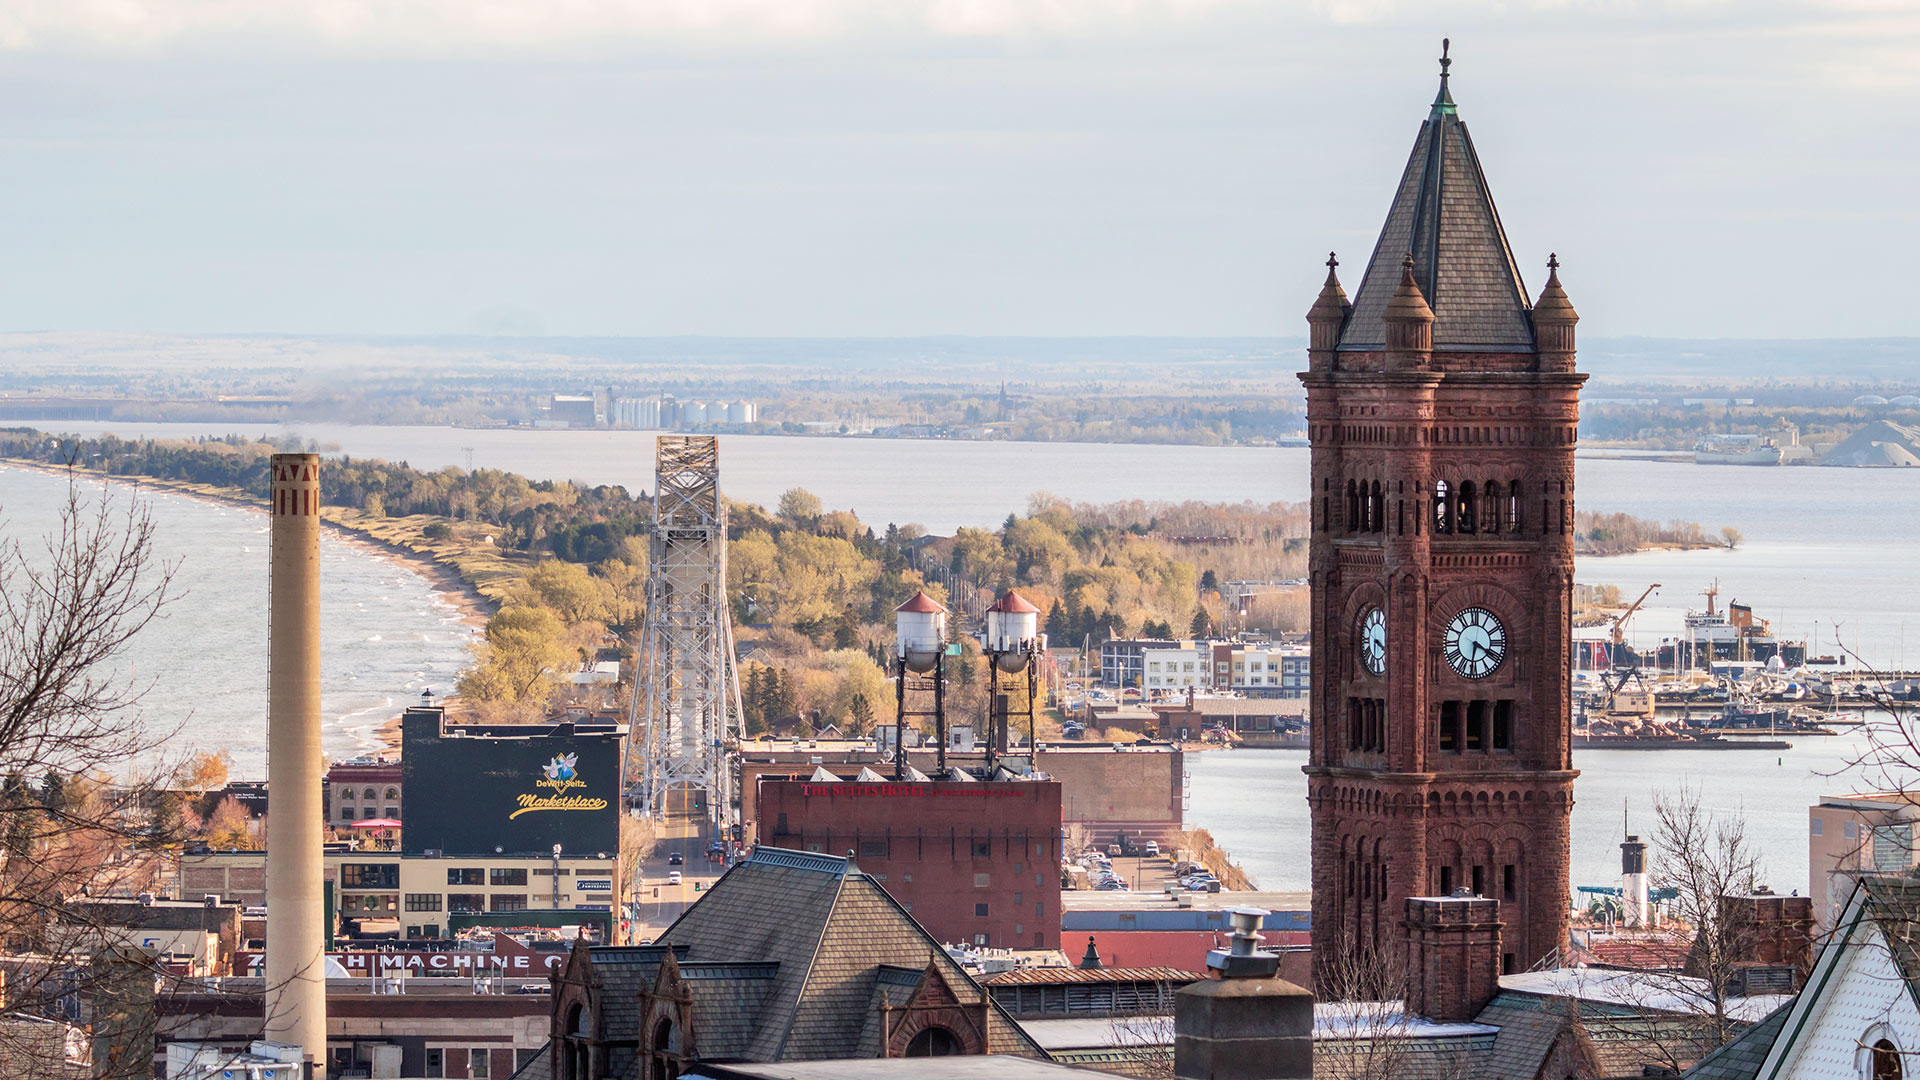 Clock tower and bridge in Duluth